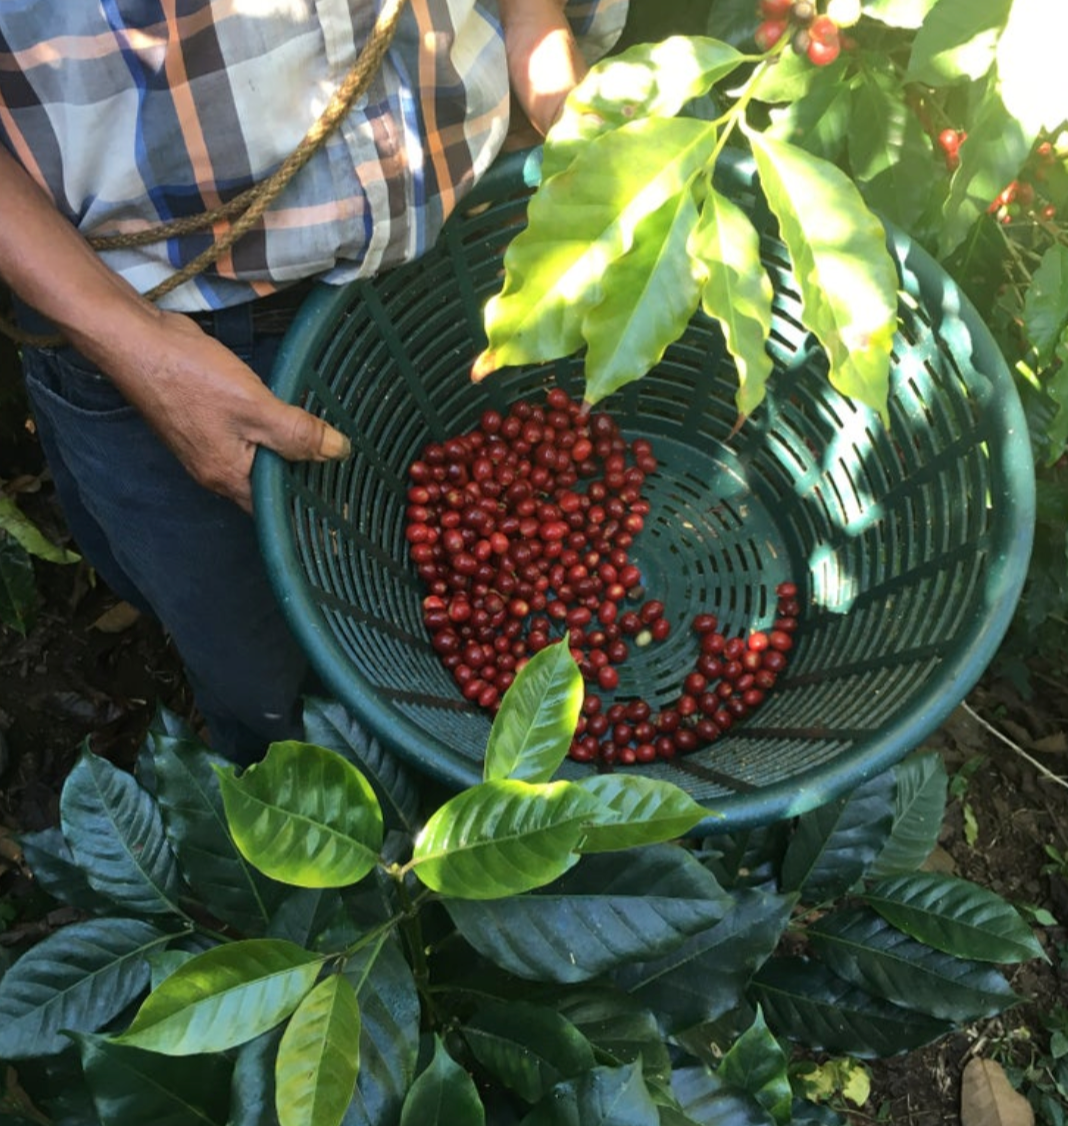 A world of speciality coffee : Central America (Part 2)